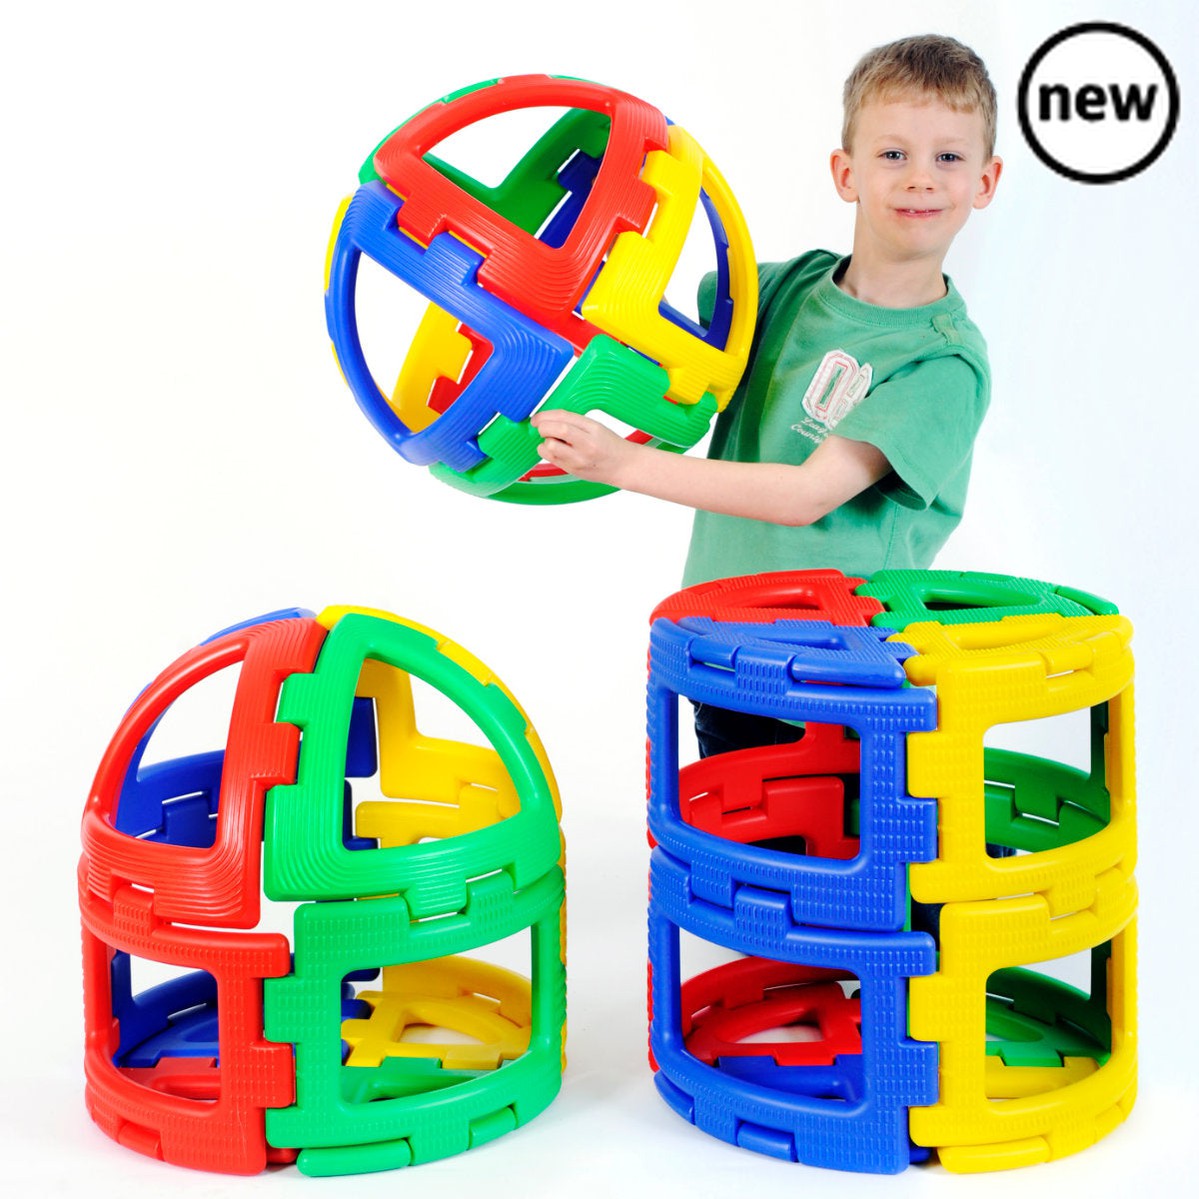 Giant Polydron Sphera Set, The Giant Polydron Sphera Set is the perfect educational tool for nurseries, early years, kindergartens, and reception classes. It allows children to build spherical constructions, making it an ideal resource for early geometry lessons.This set is designed to introduce and explore the properties of 2D and 3D shapes, while also developing spatial awareness at an early age. The hands-on and engaging nature of this set ensures that children have fun while learning.With a variety of p